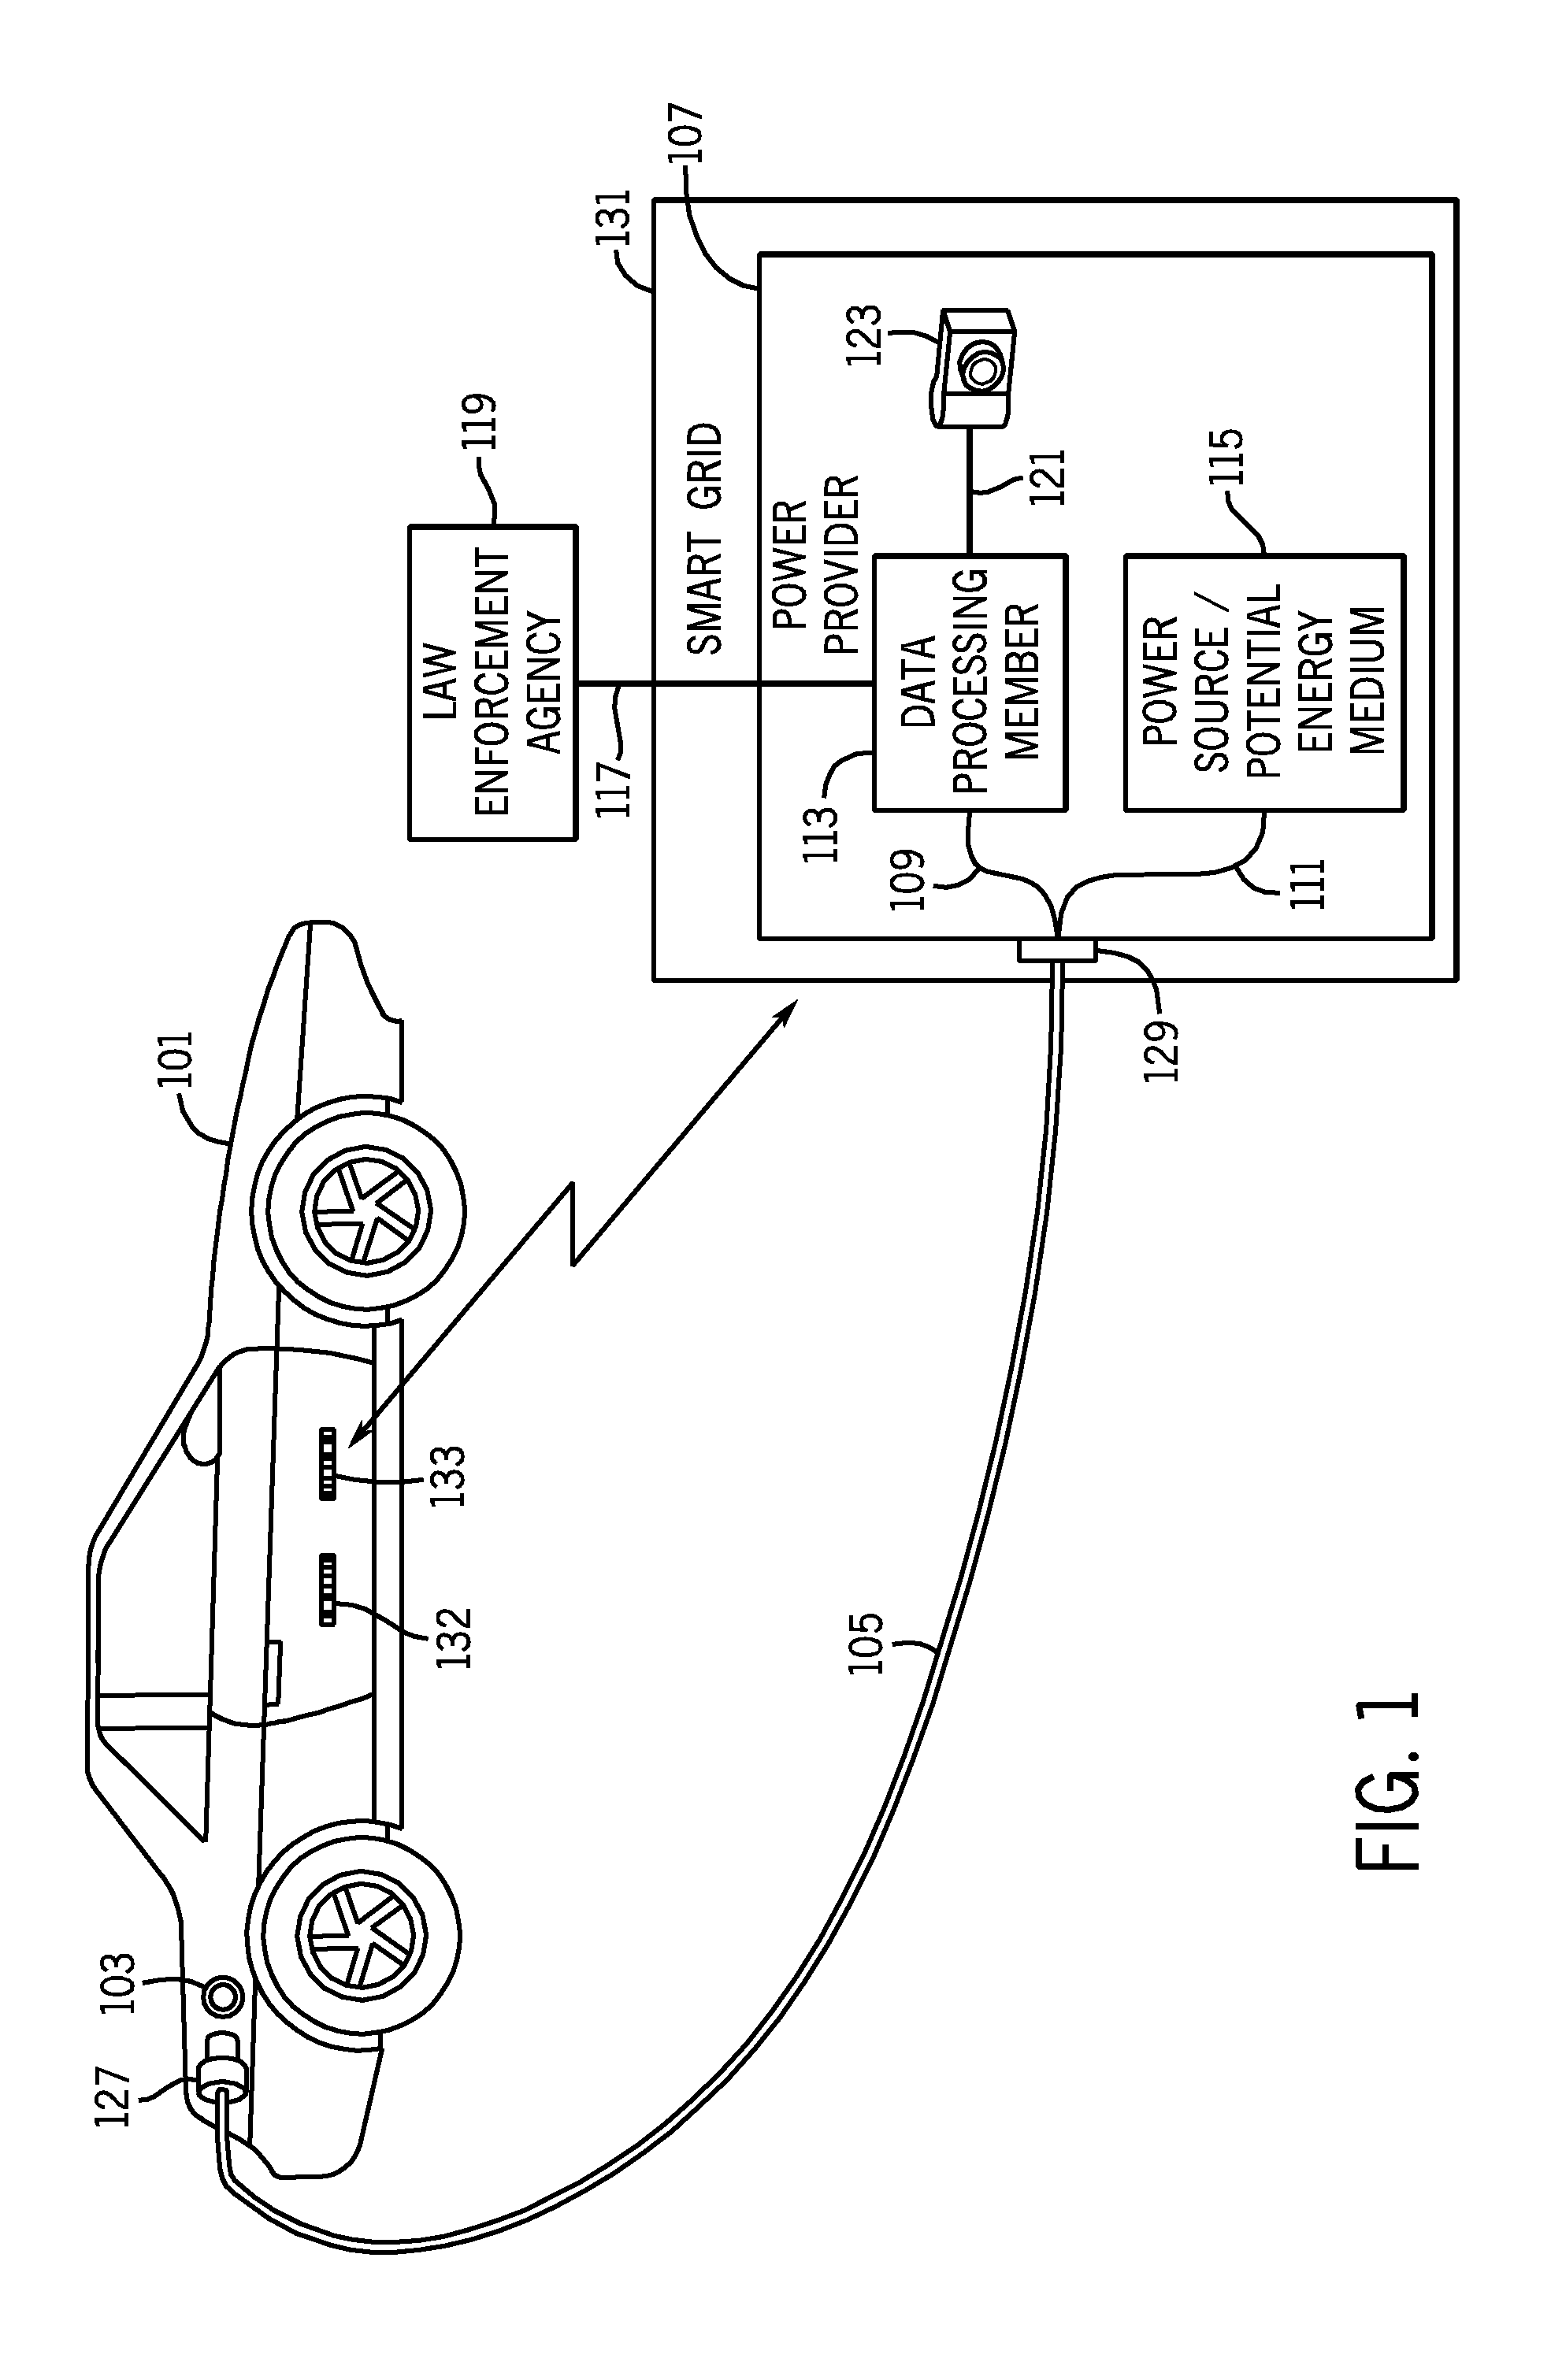 Method and apparatus for controlling the recharging of electric vehicles and detecting stolen vehicles and vehicular components